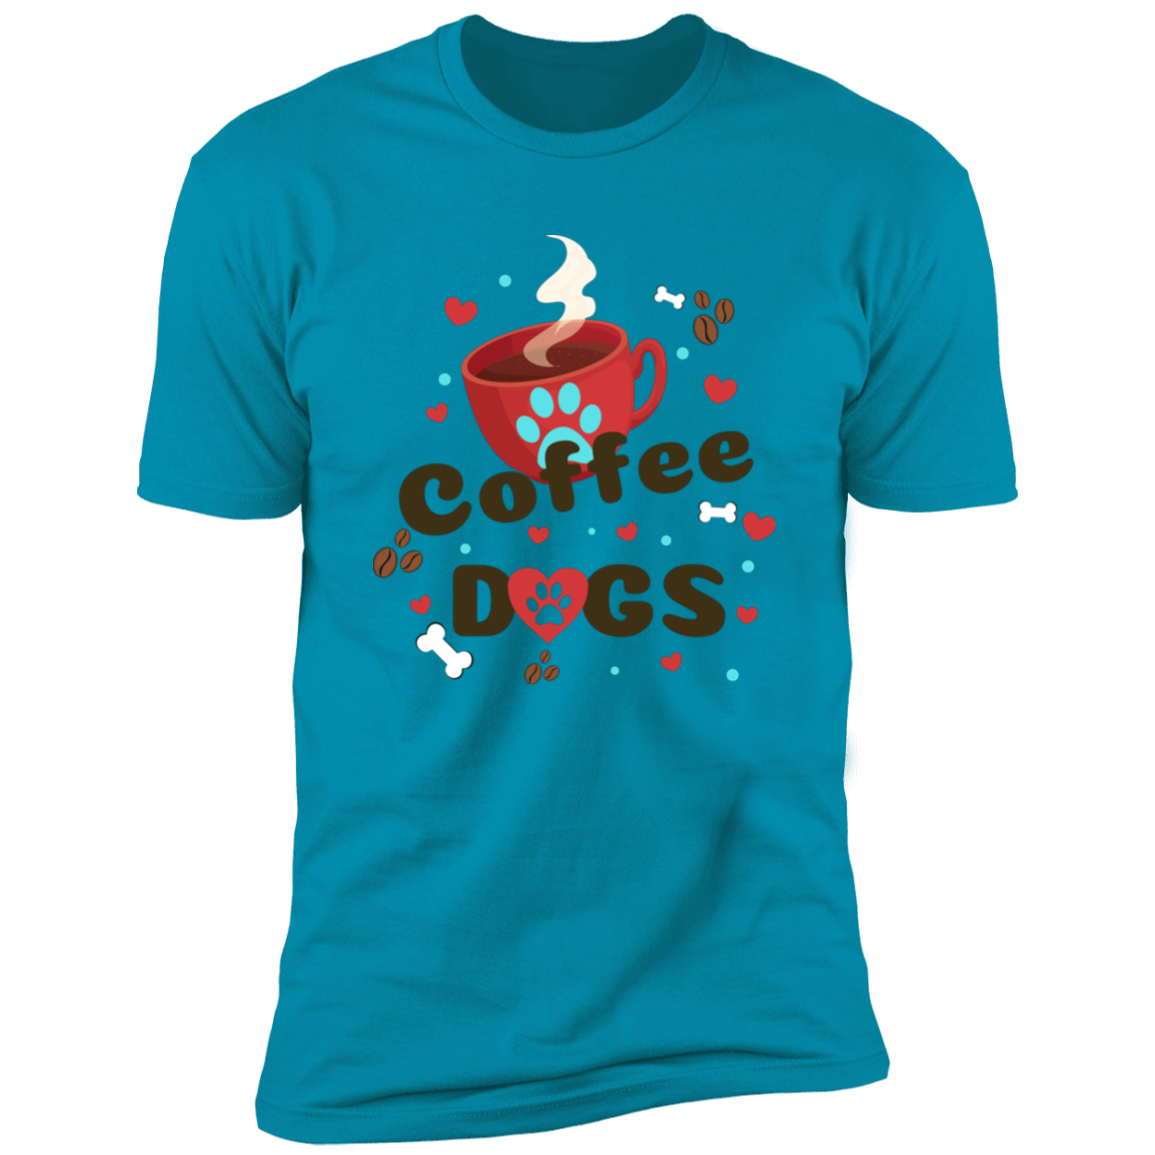 Coffee Dogs T-shirt, Dog Shirt for humans, in turquoise